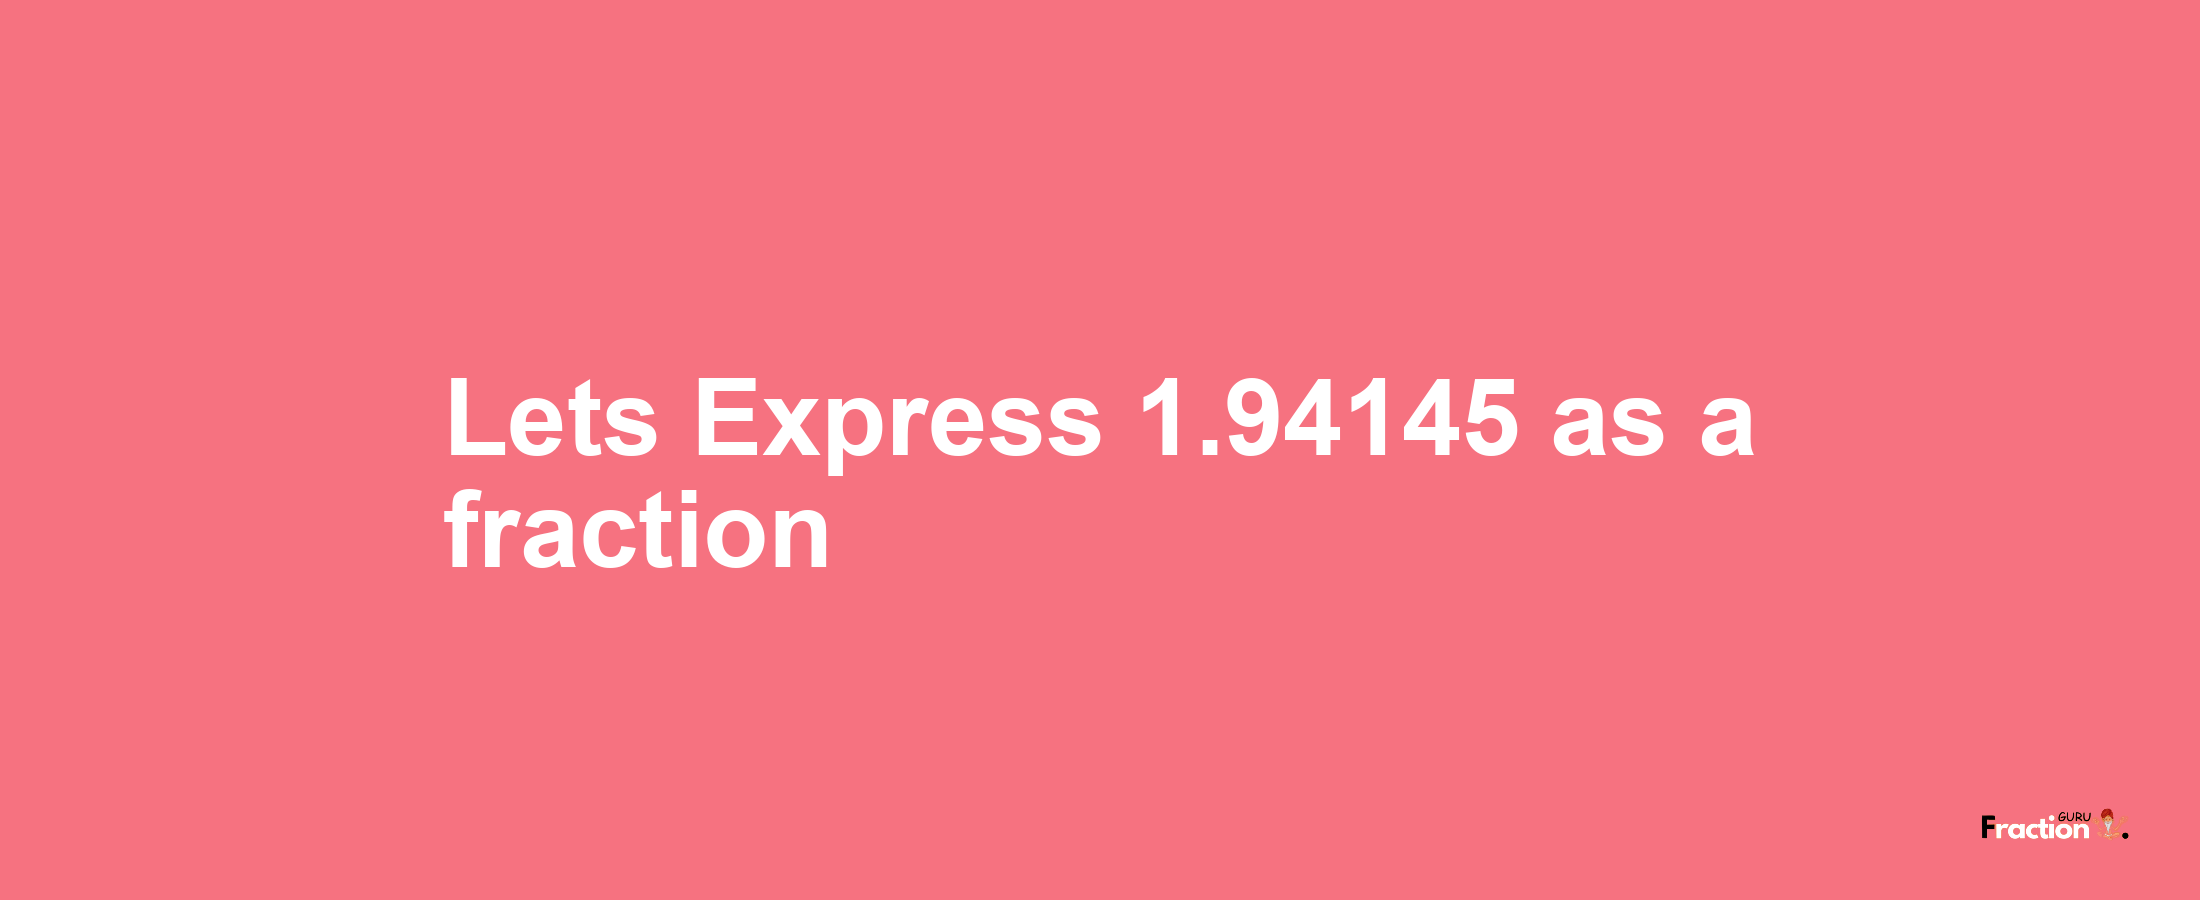 Lets Express 1.94145 as afraction